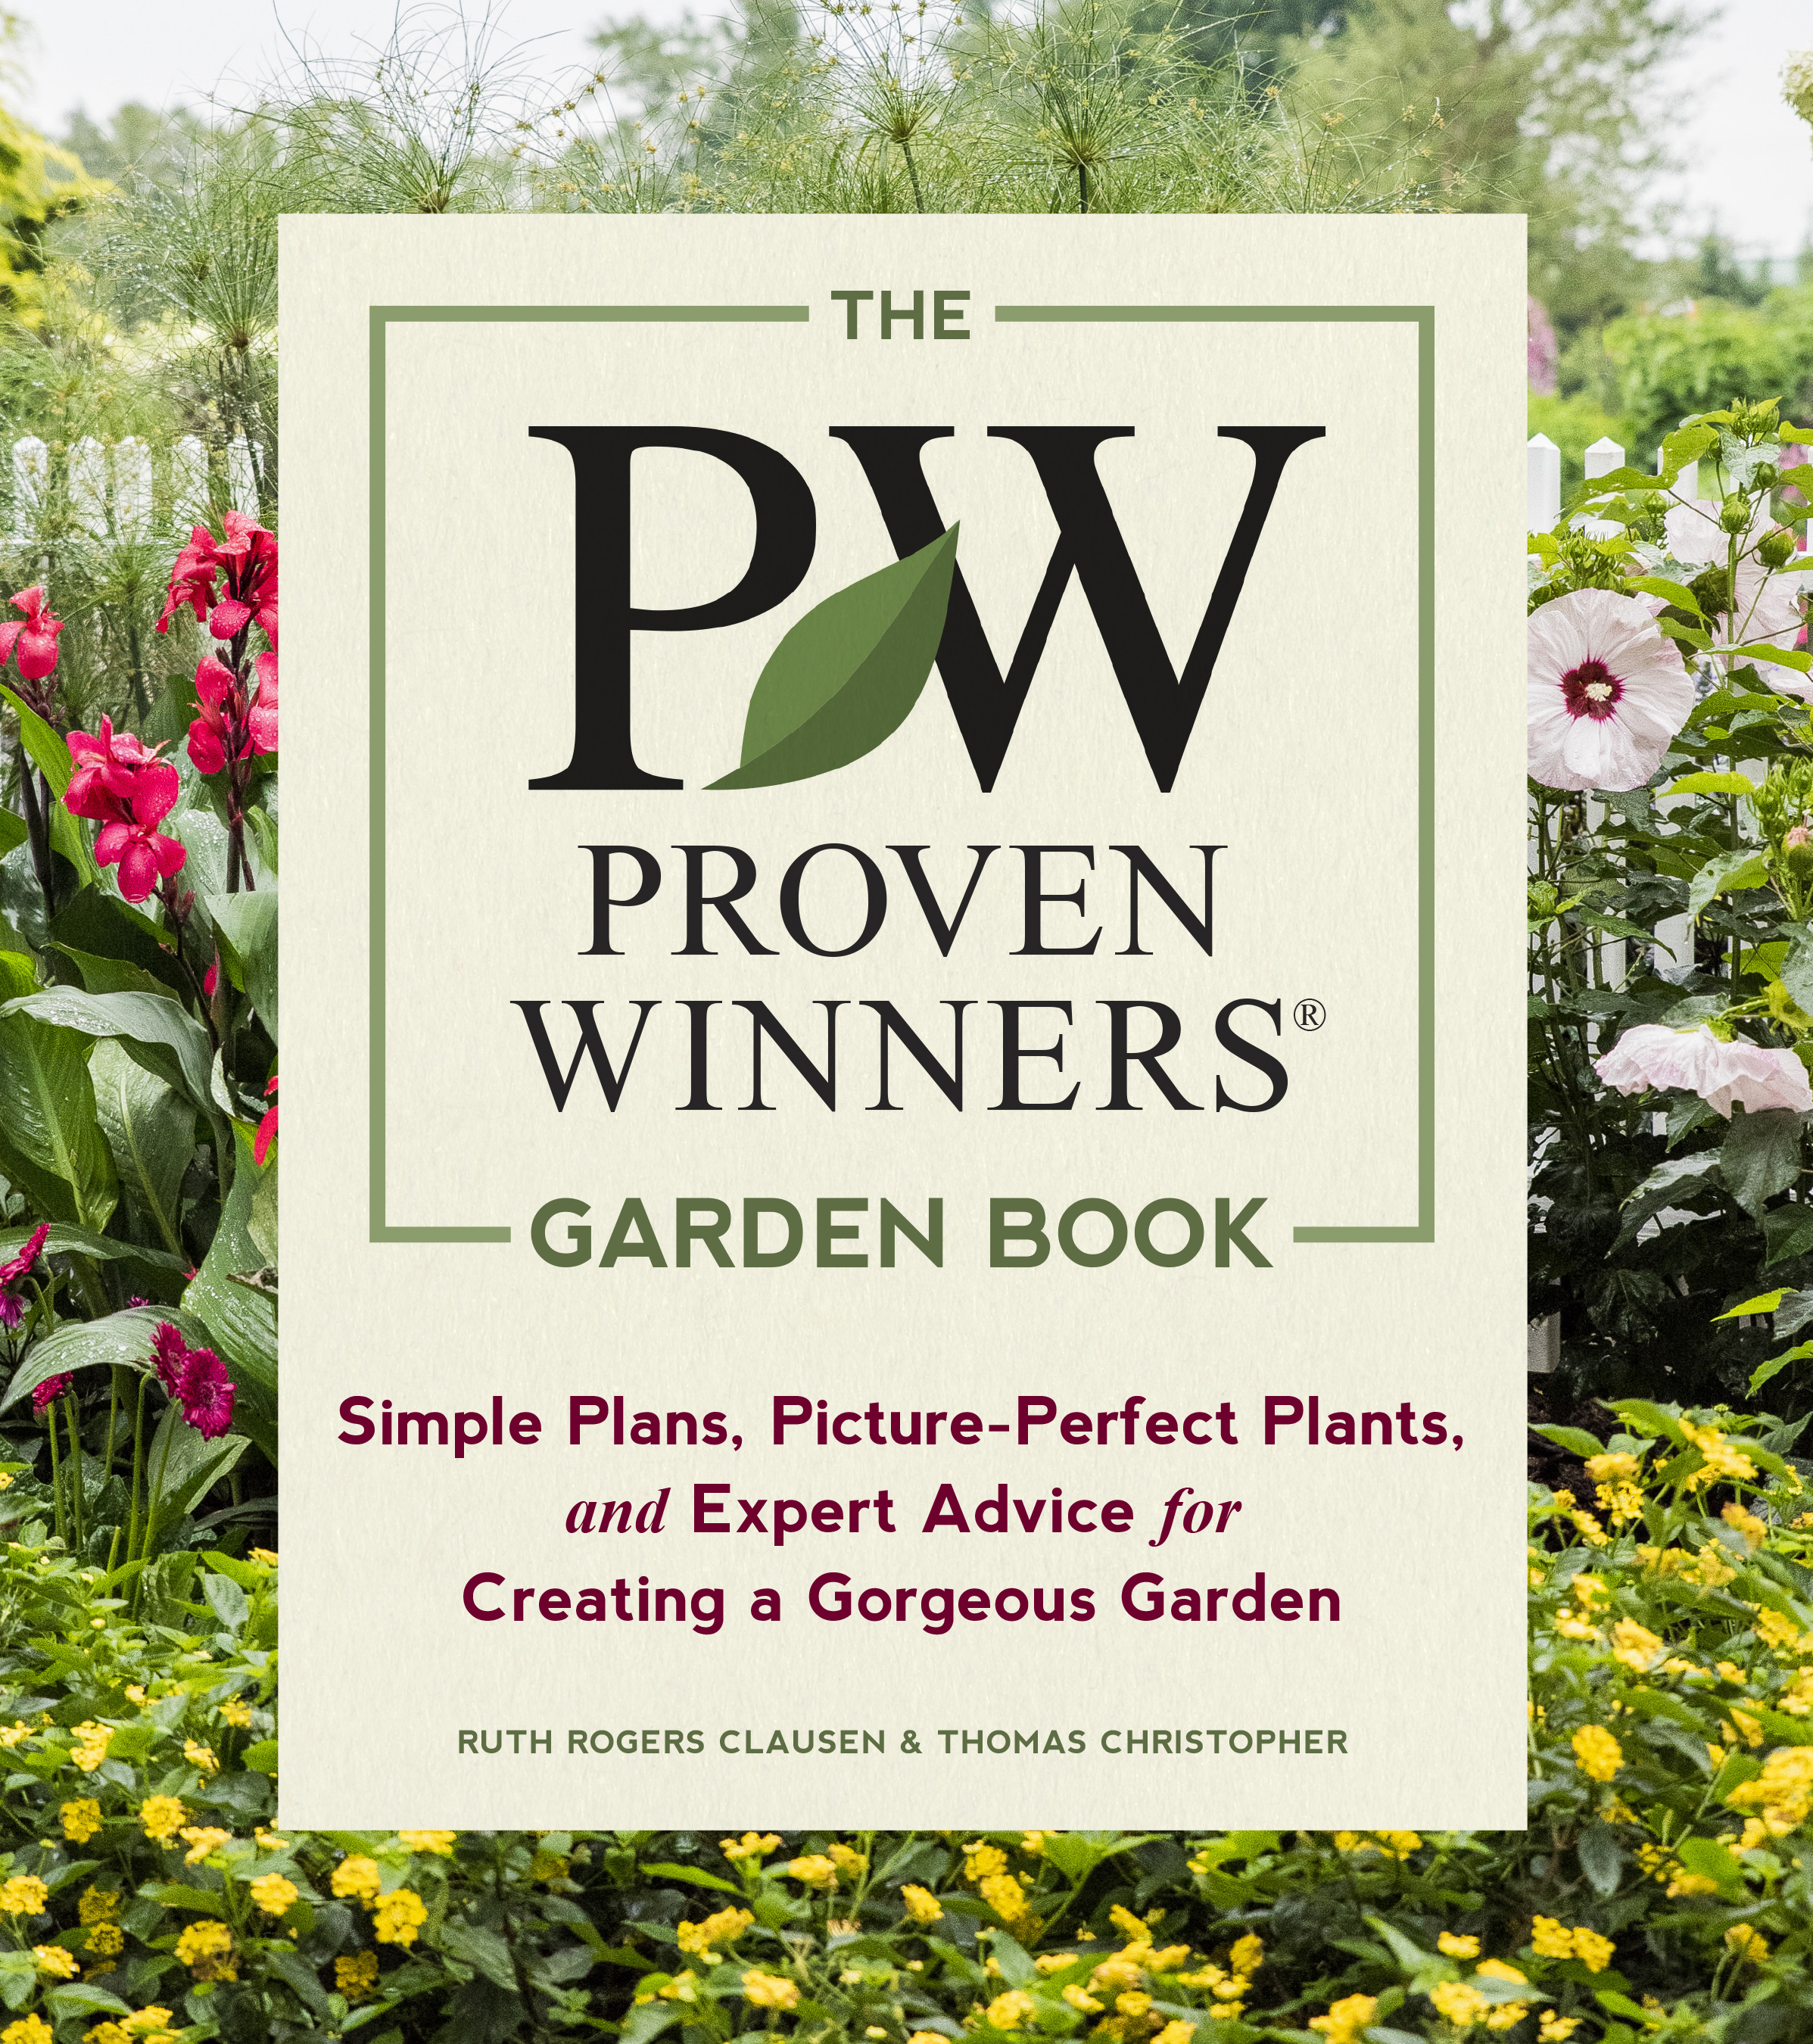 The proven winners garden book simple plans, picture-perfect plants, and expert advice for creating a gorgeous garden cover image